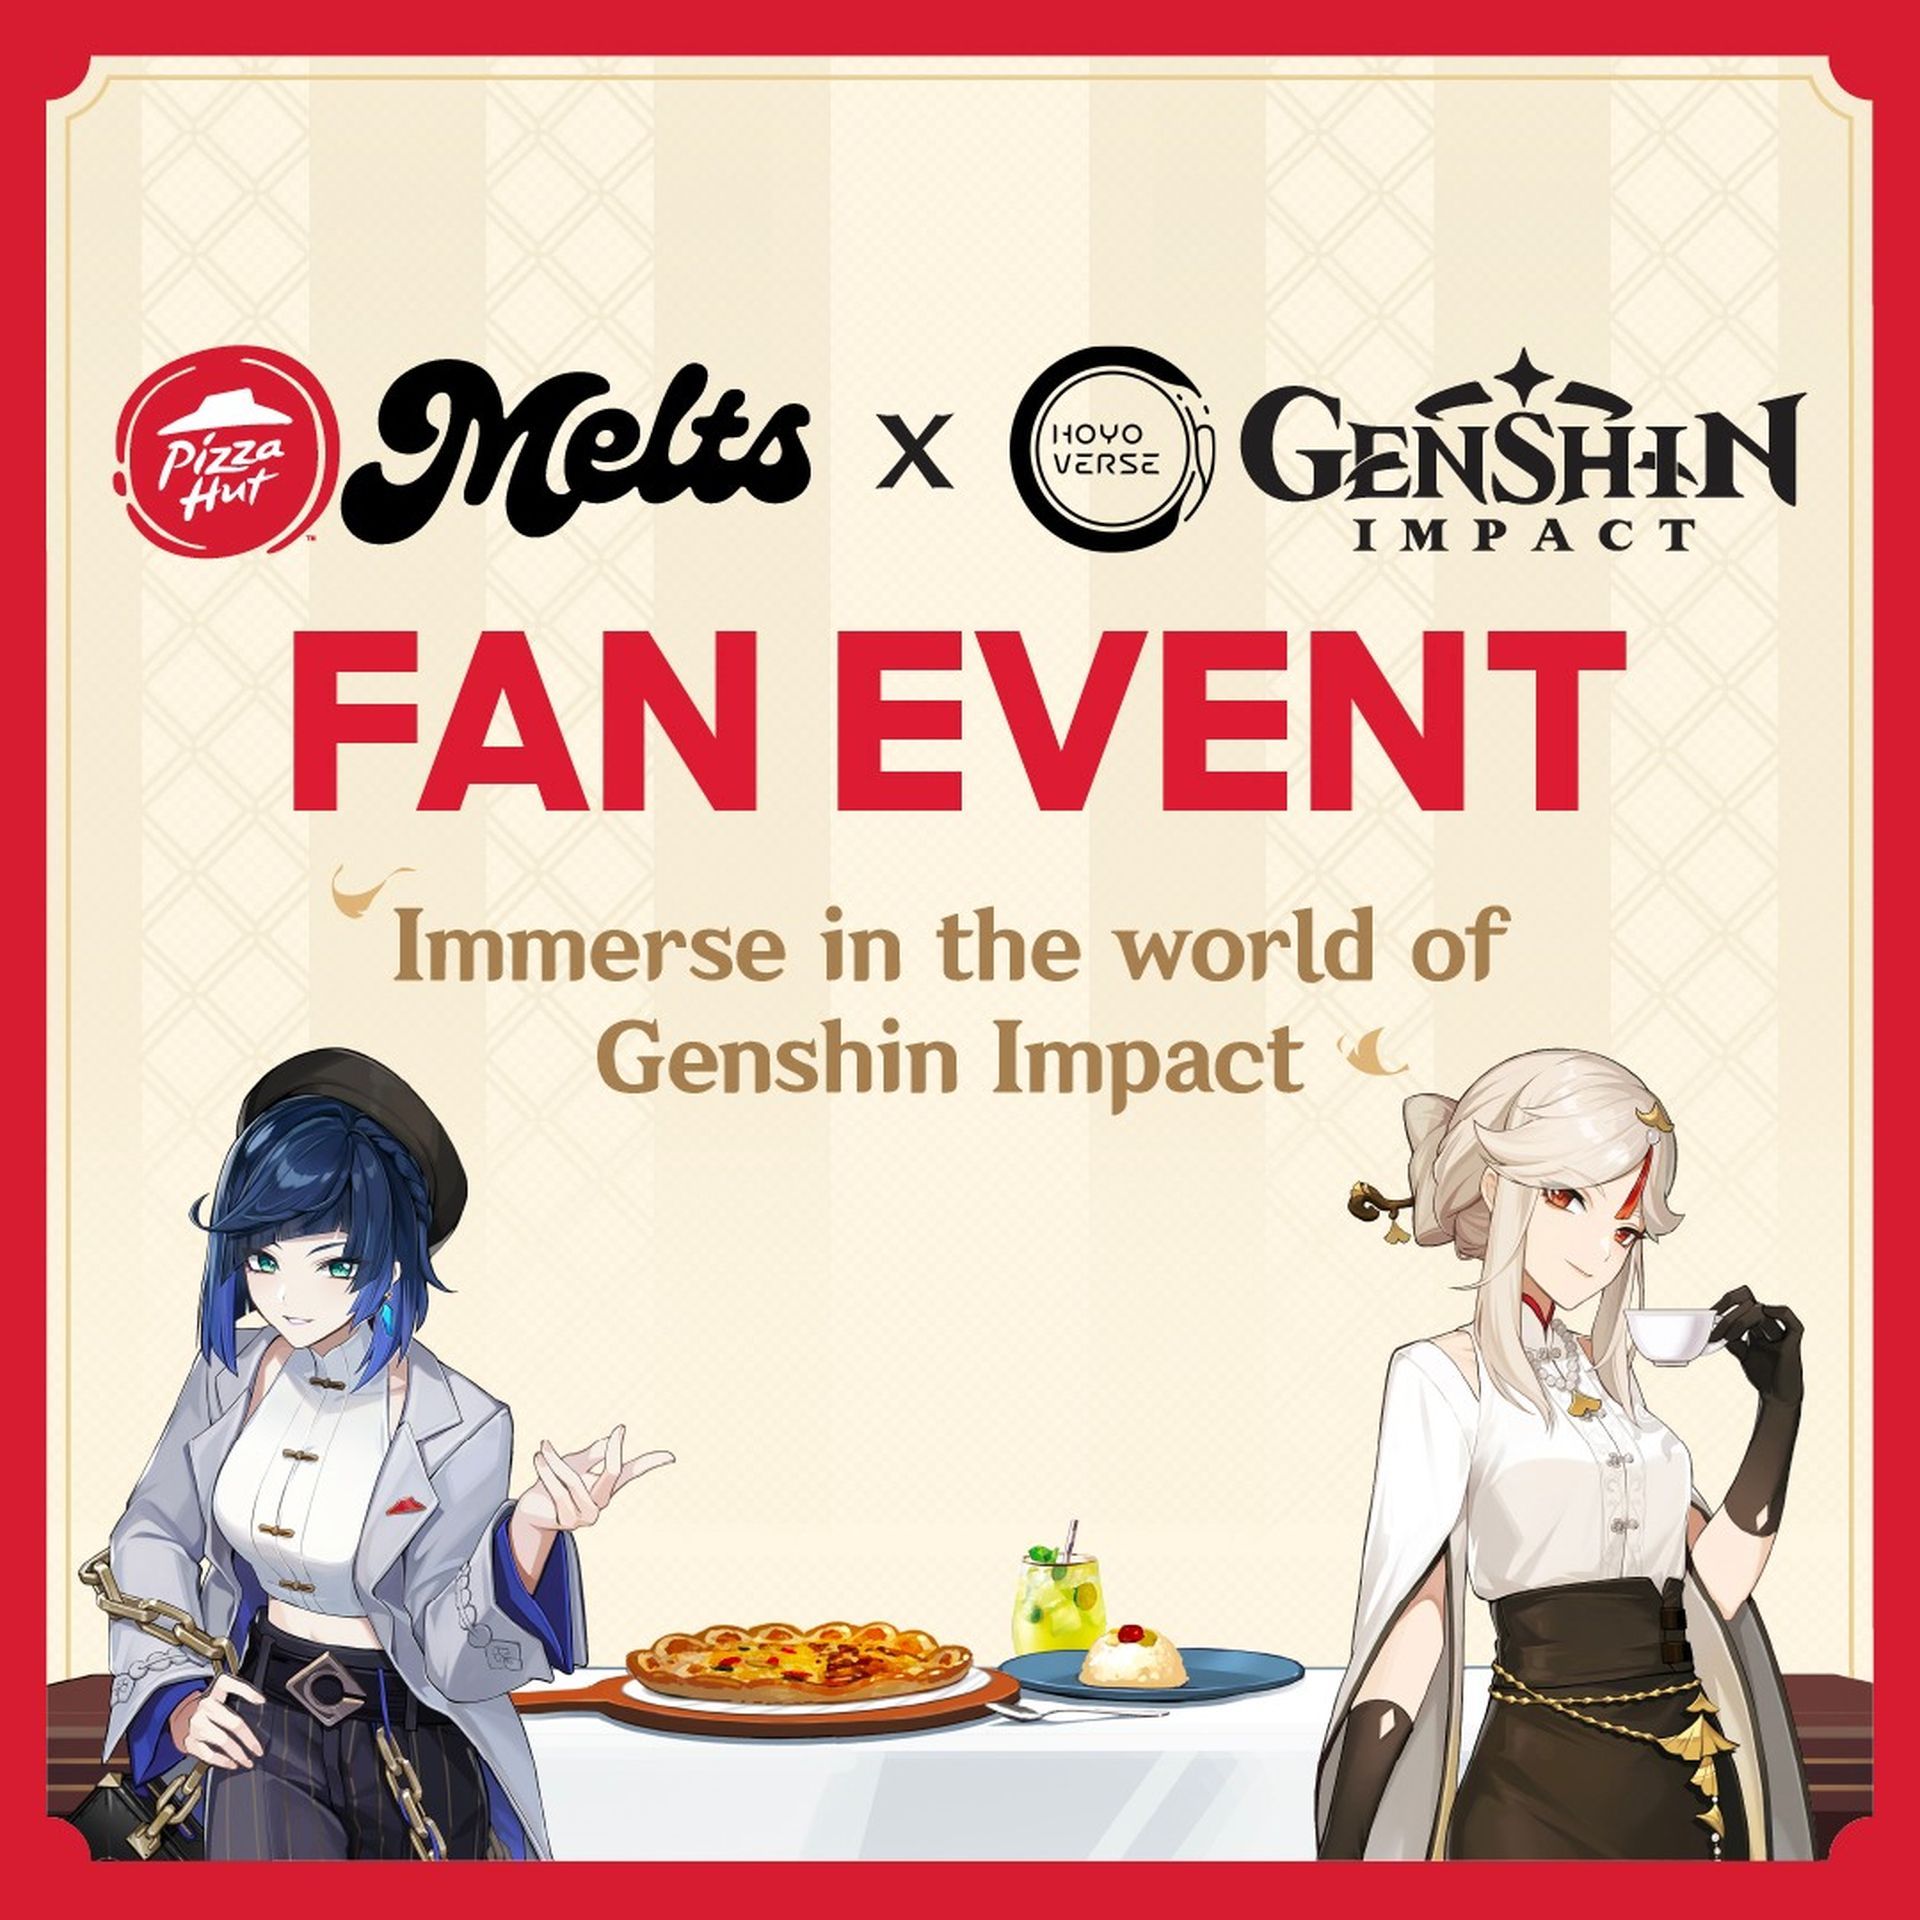 Pizza Hut x Genshin Impact collaboration A fusion of gaming and pizza